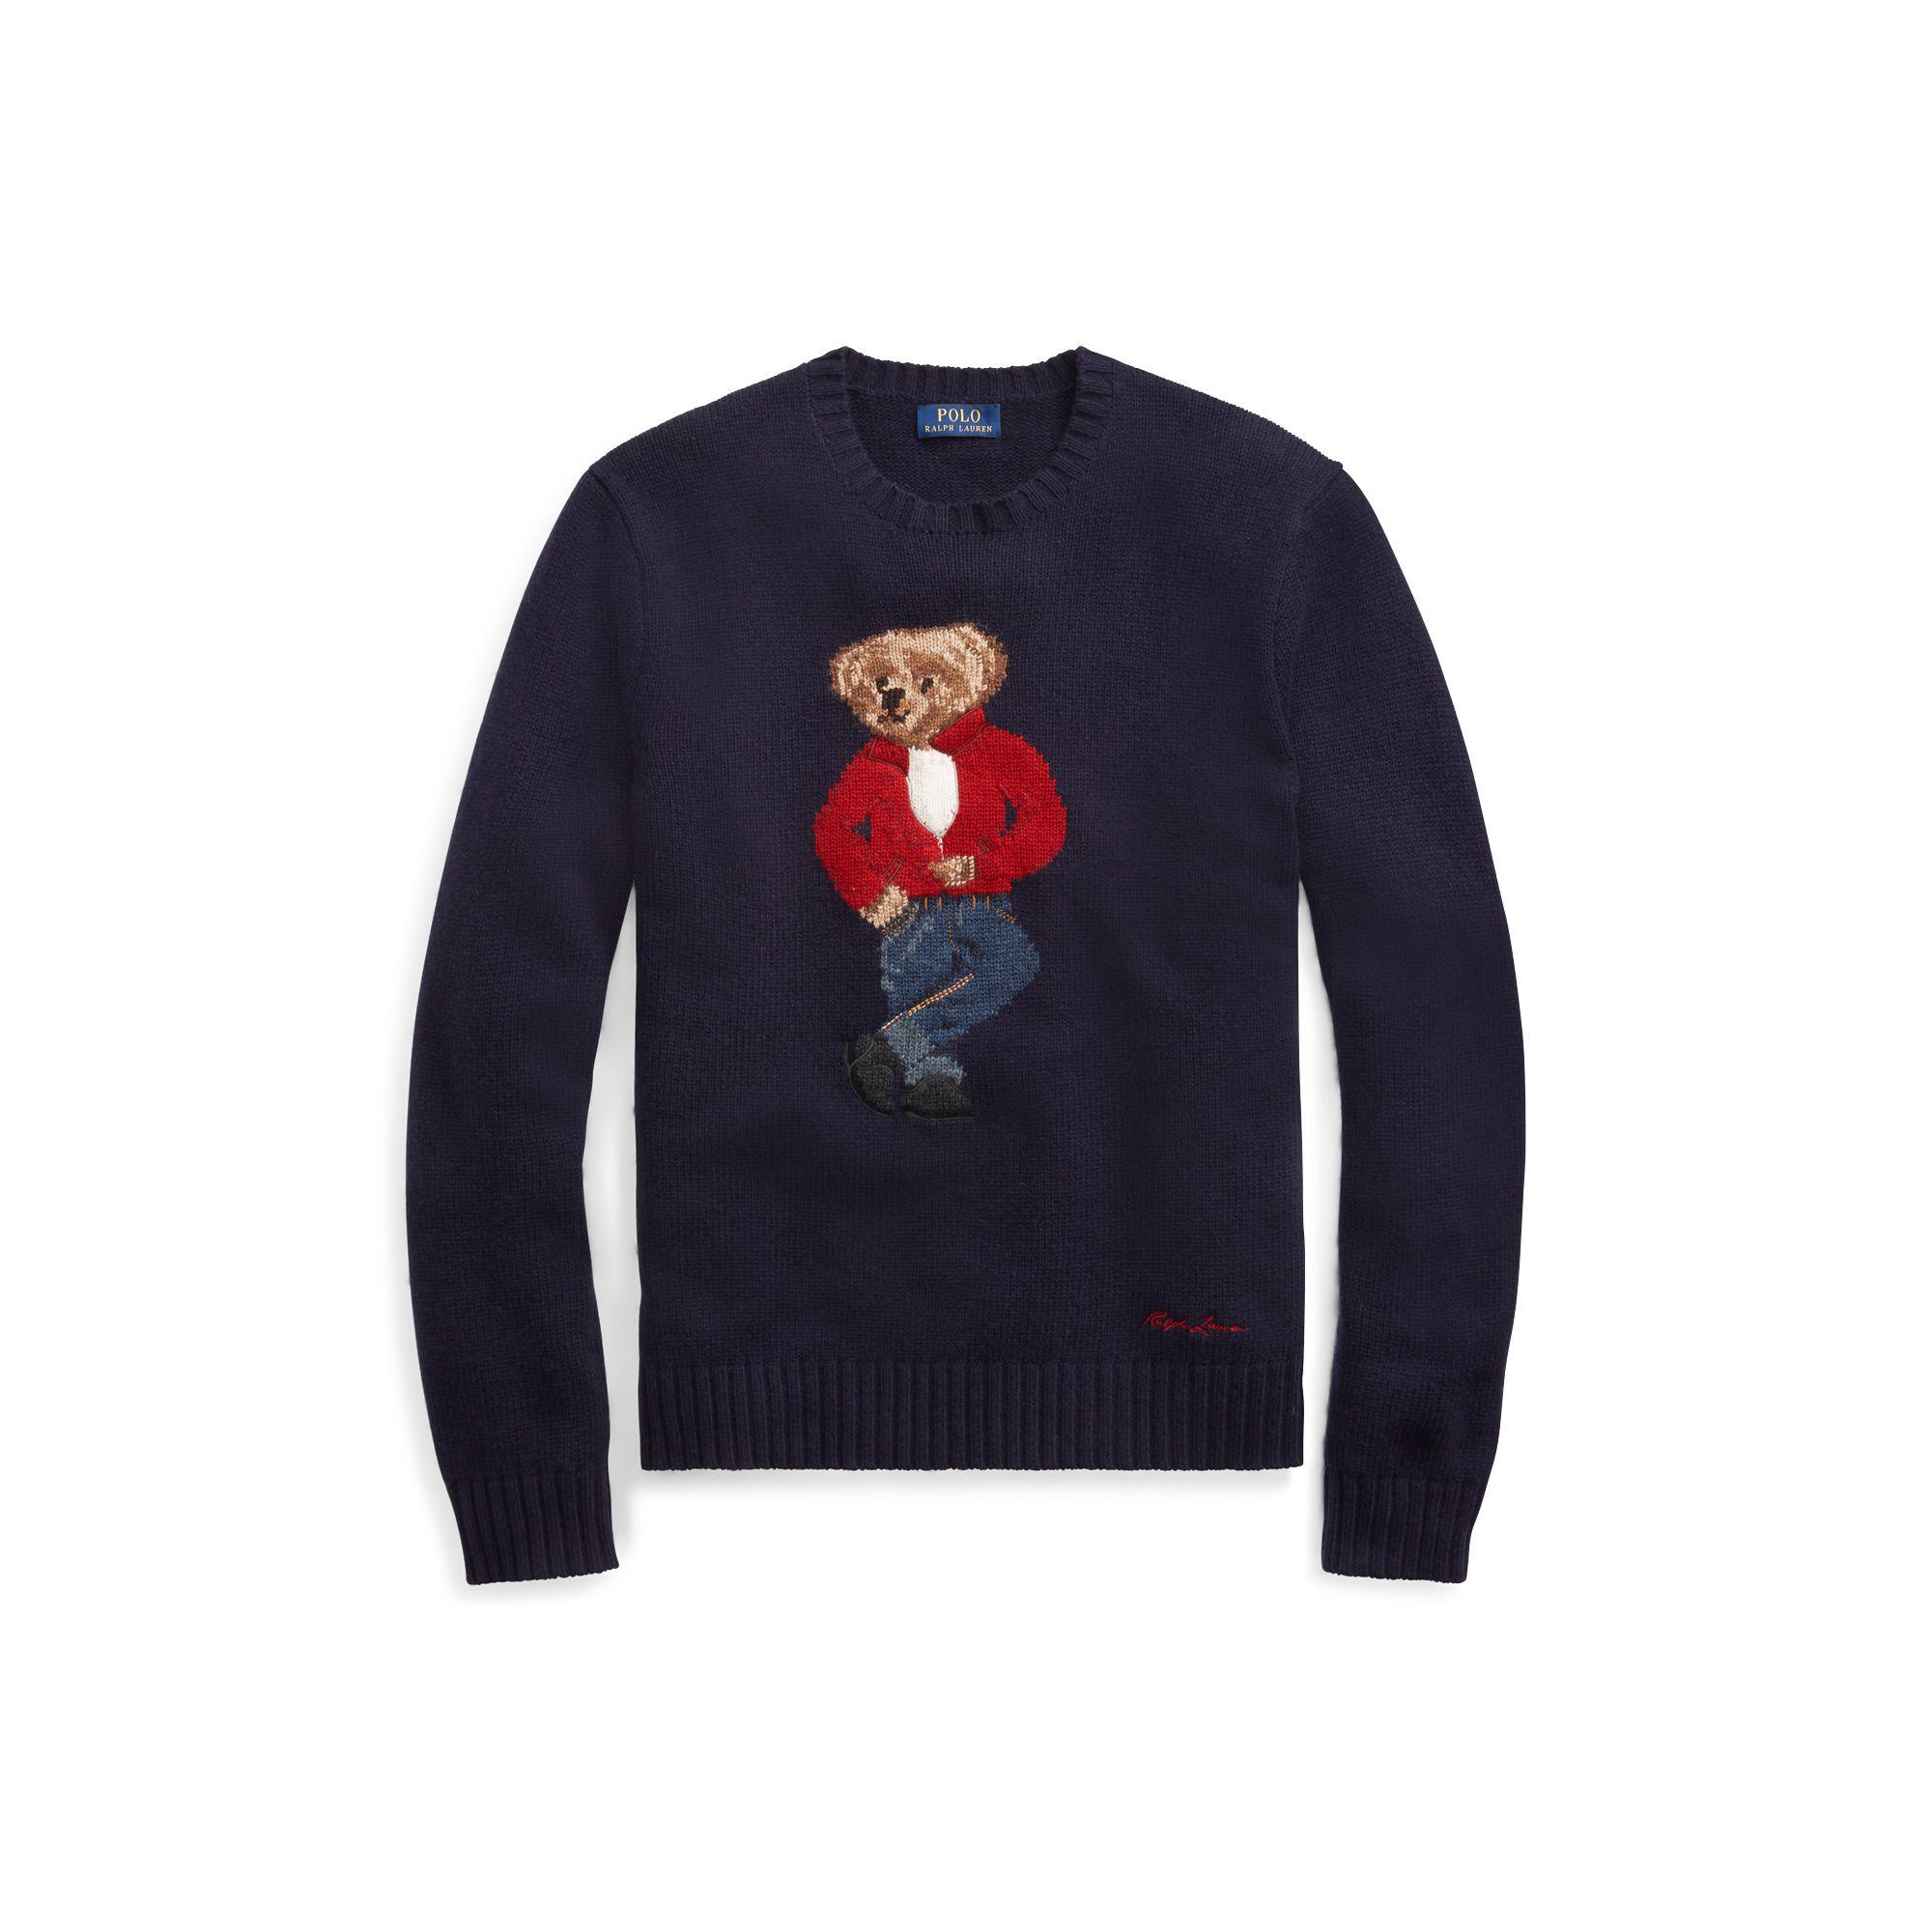 Lyst - Polo Ralph Lauren Polo Bear Wool Sweater in Blue for Men - Save ...